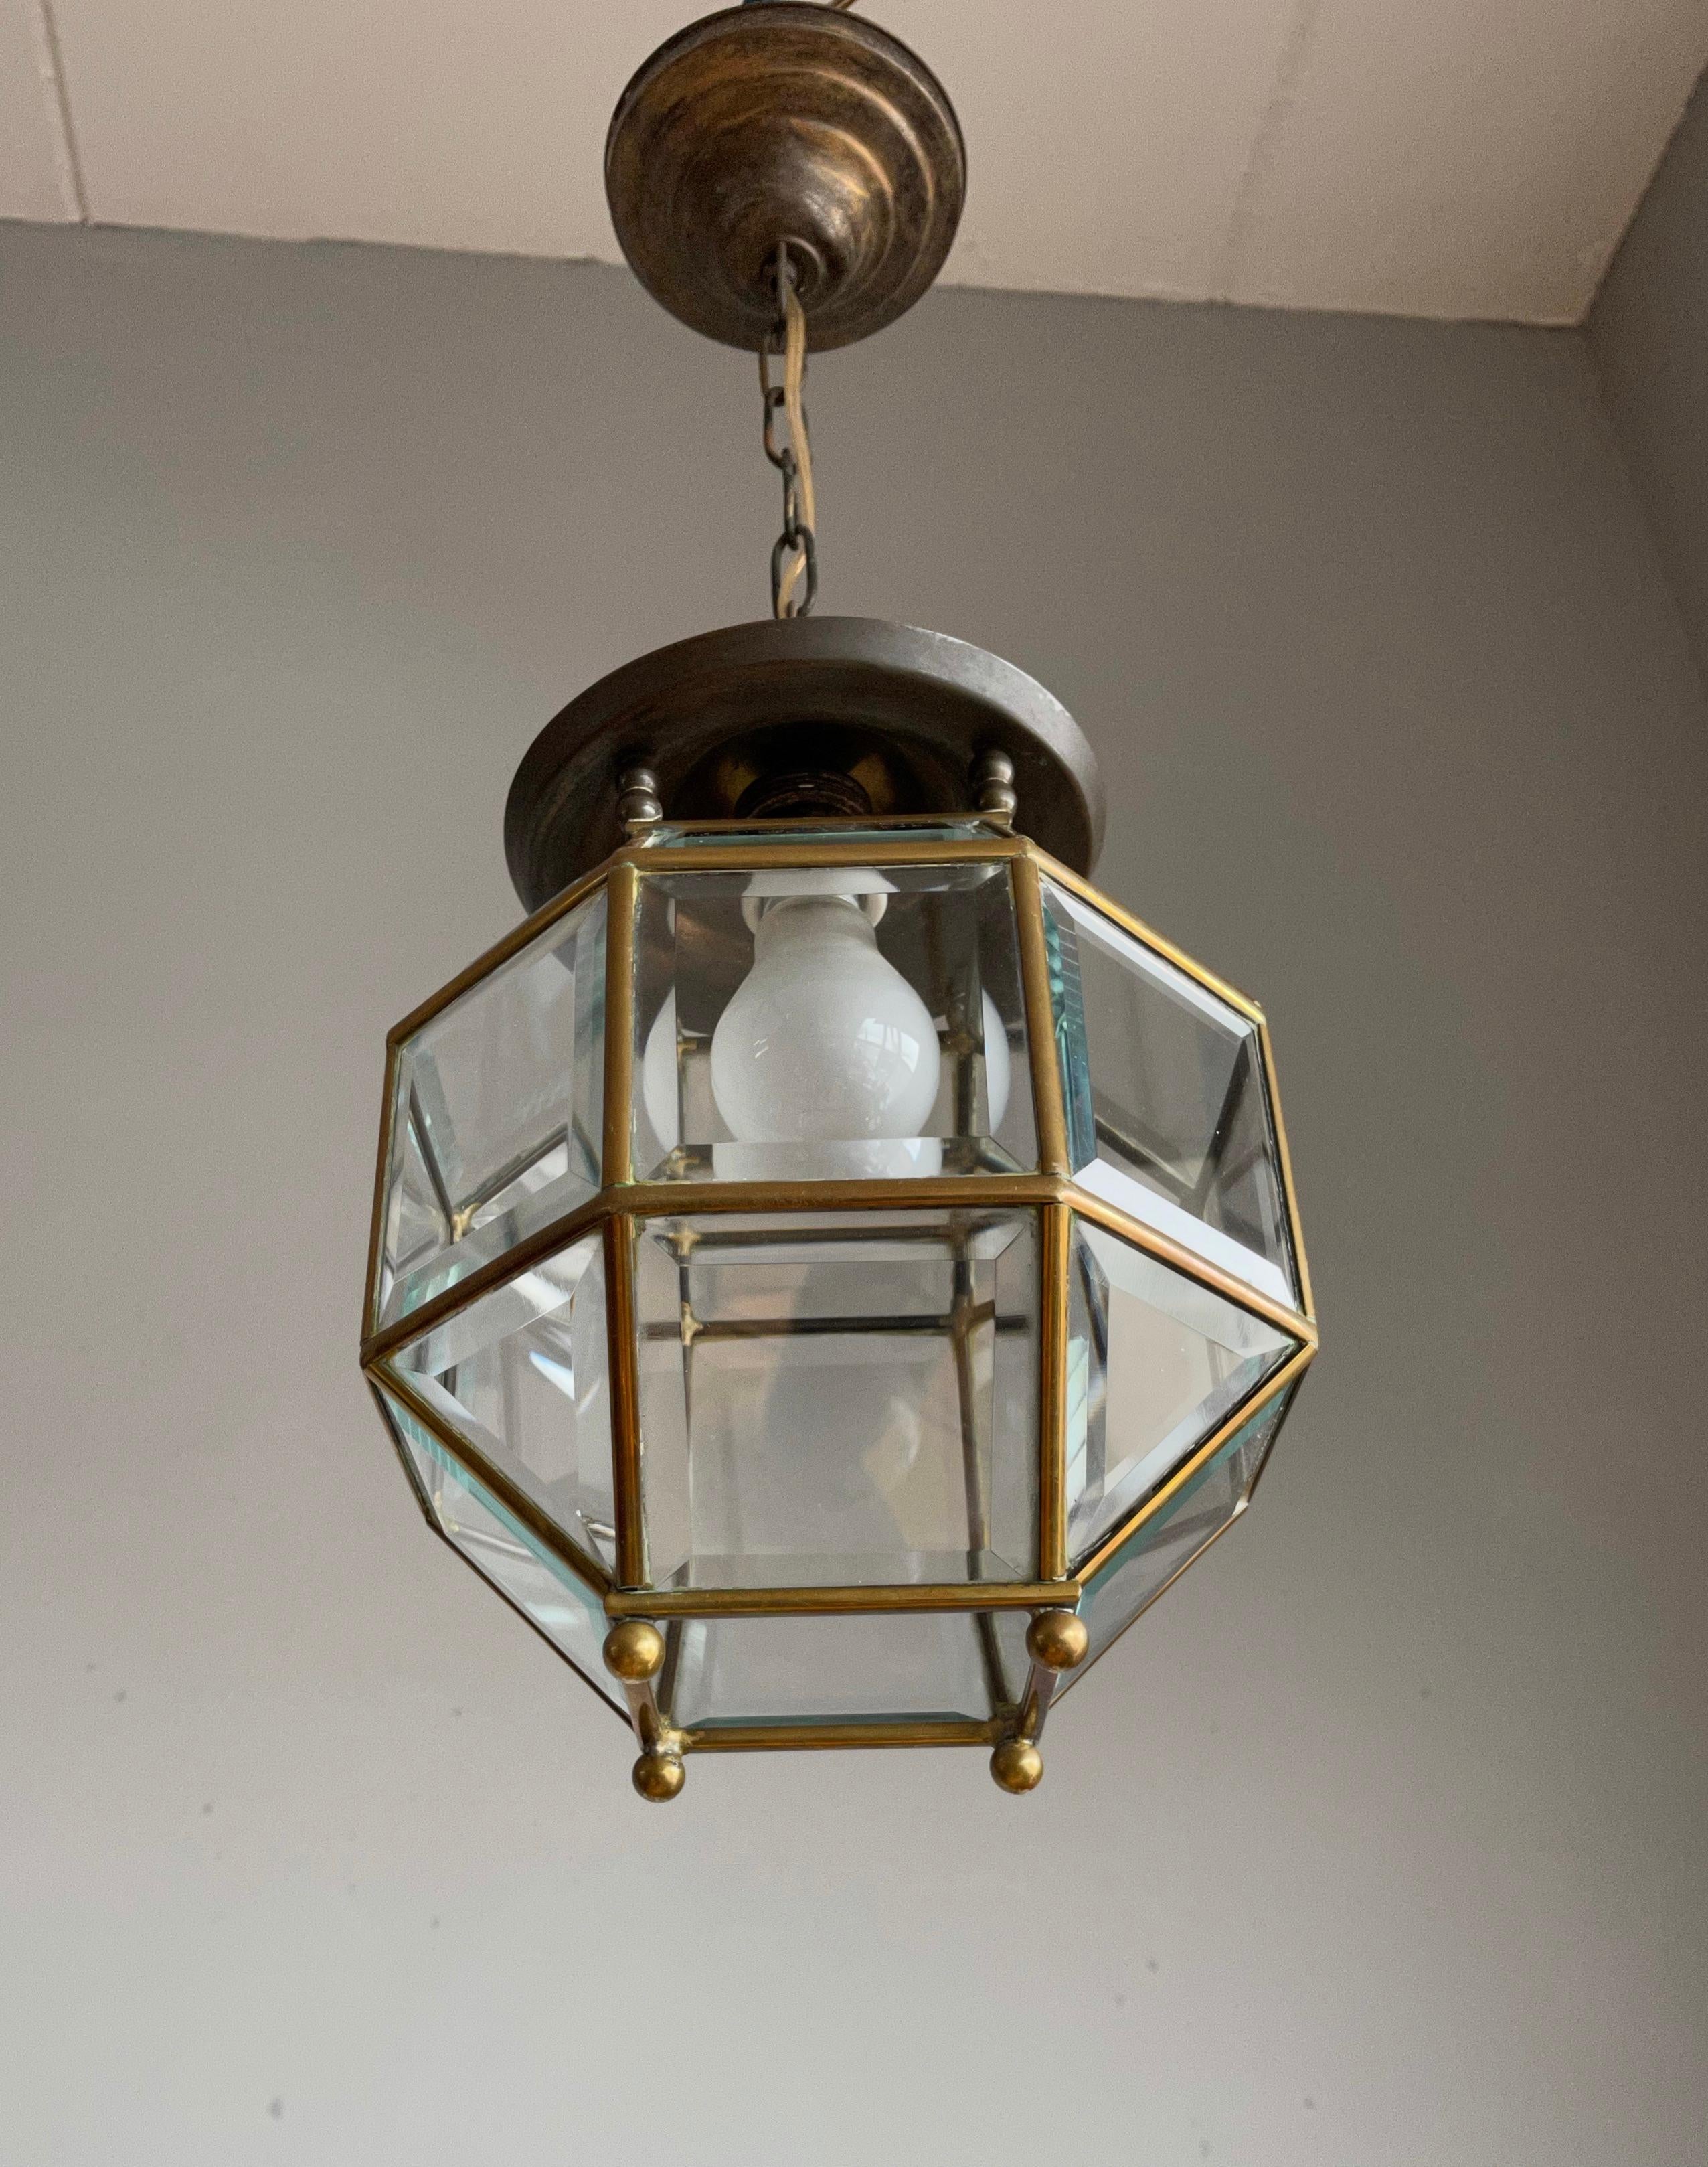 Early 1900s Beveled Glass and Brass Pendant Cubic Adolf Loos Style Ceiling Light 5